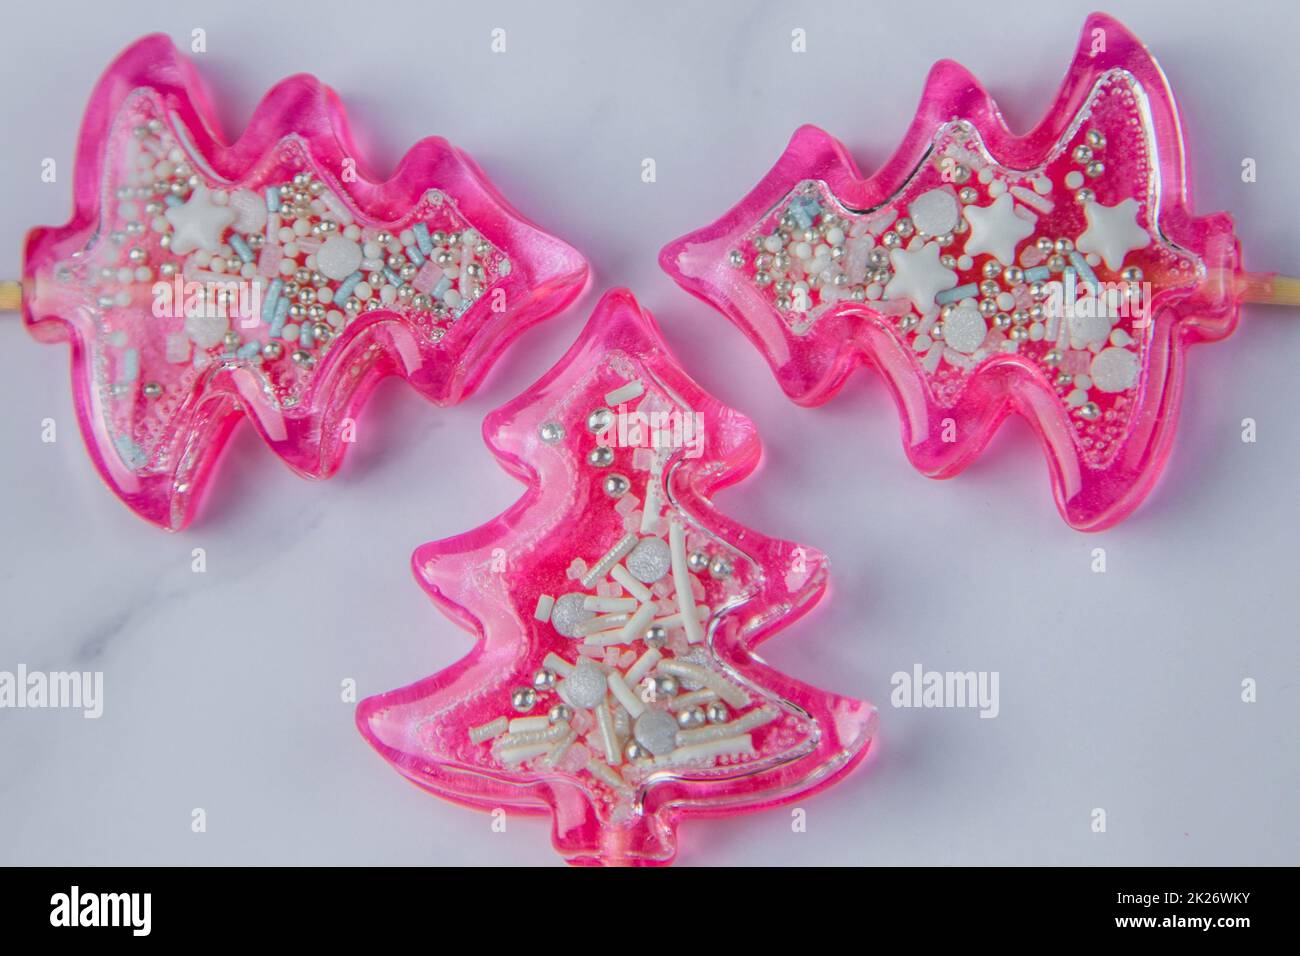 Three pink Christmas trees lollipops on a wooden leg with powder inside lie on a light marble background Stock Photo